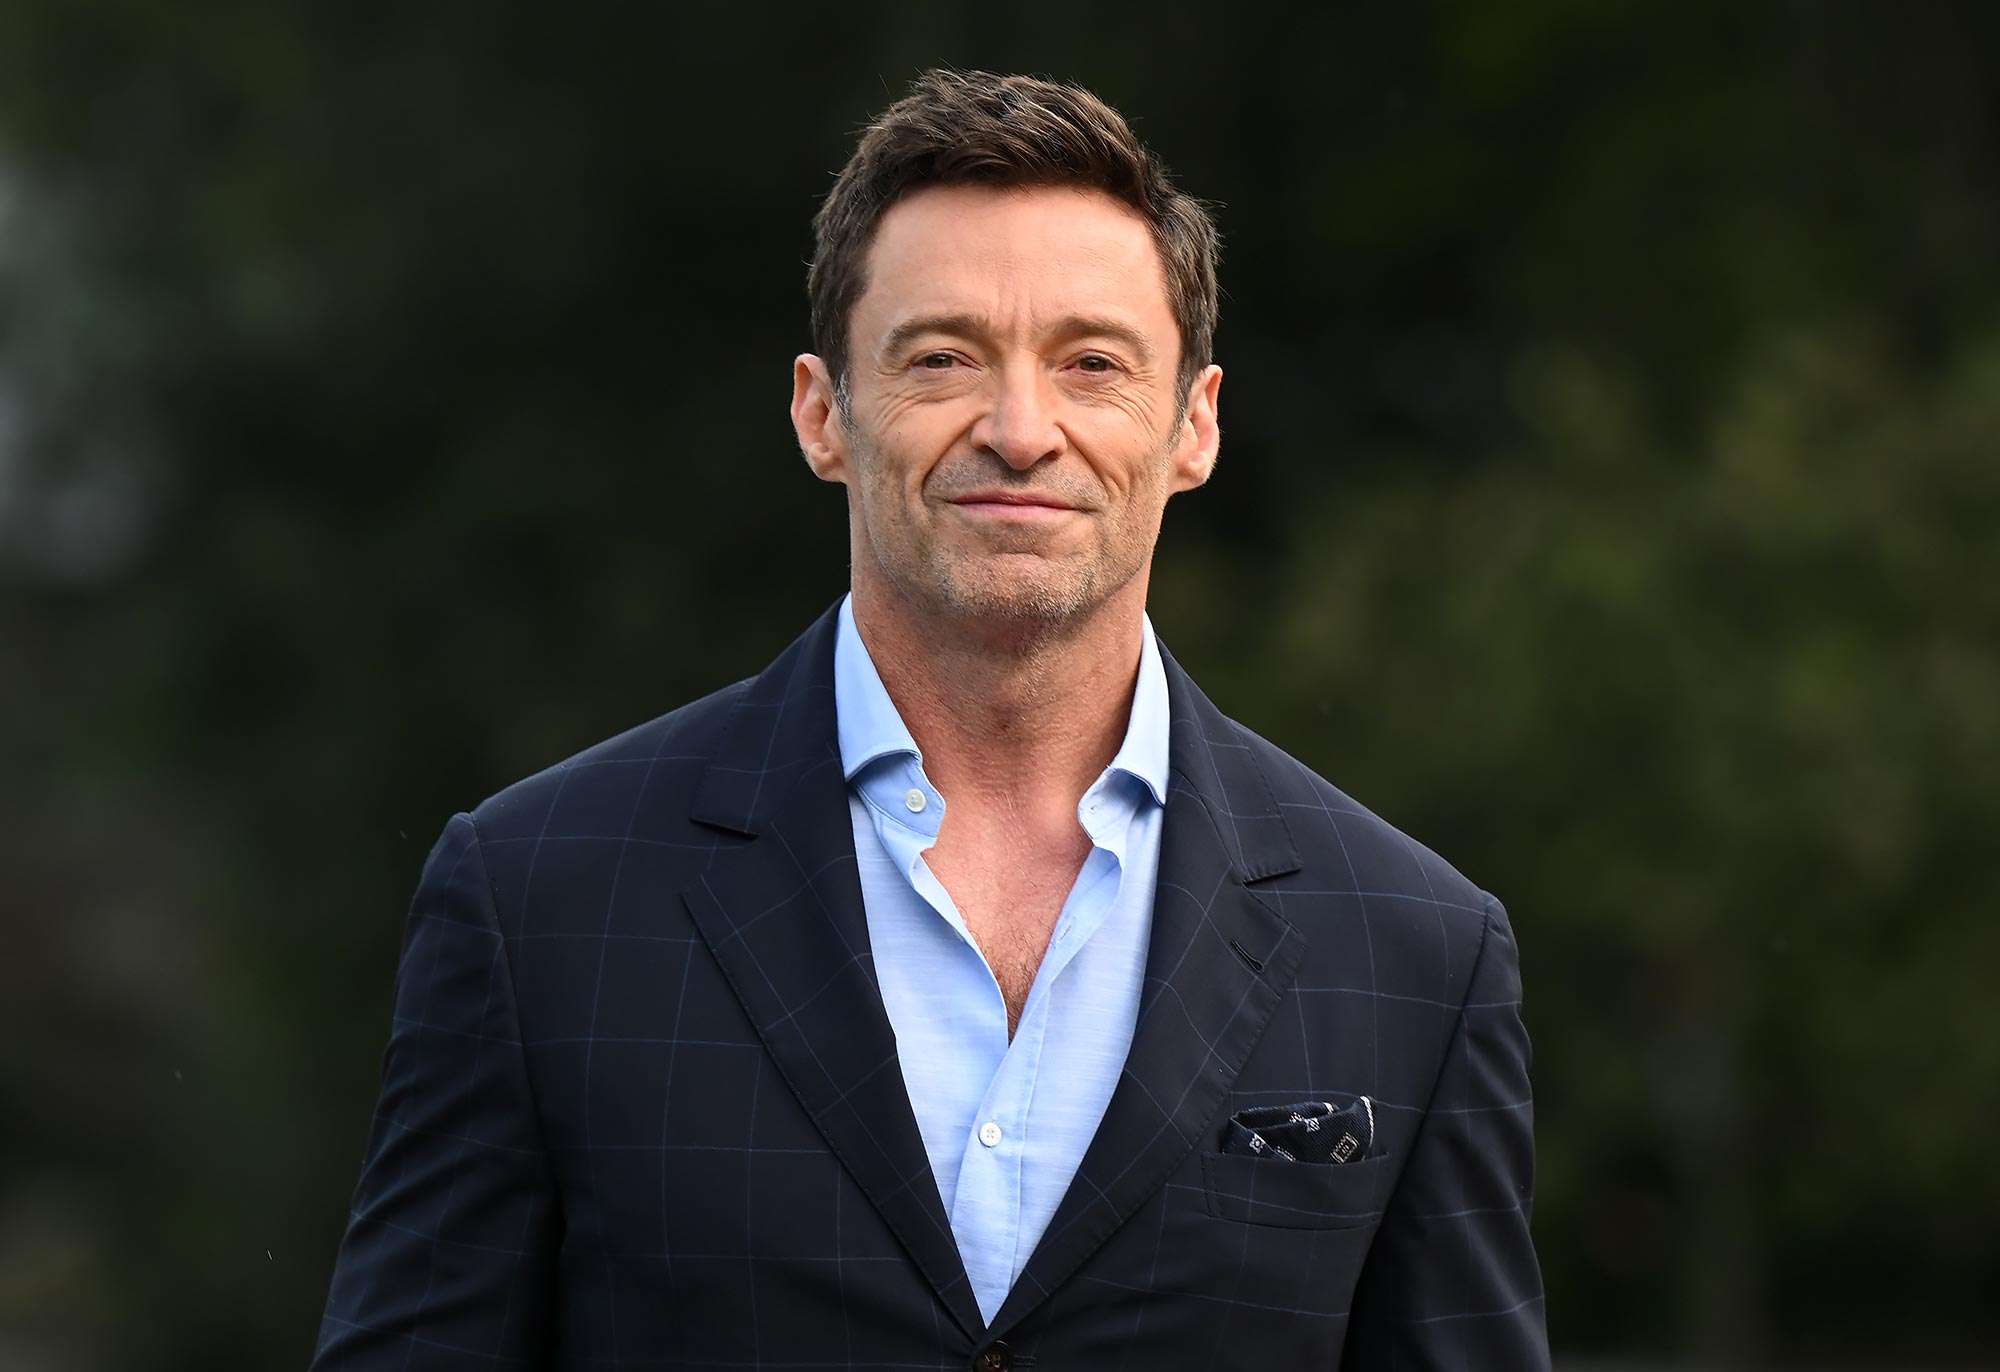 Hugh Jackman Practices Self-Care With Rose Gold Eye Masks: ‘This Is 55’